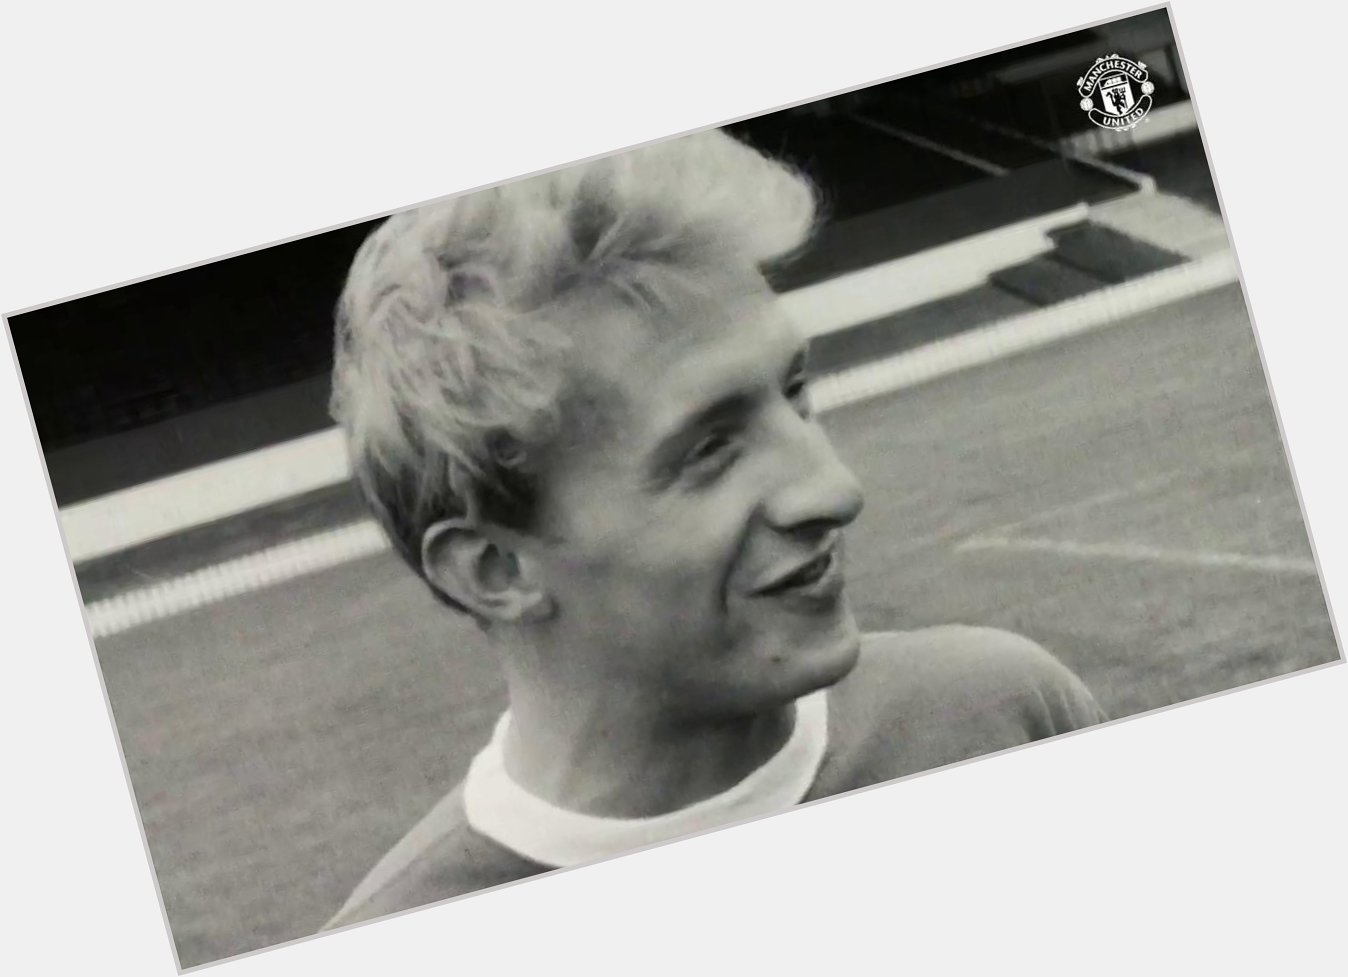 Happy 79th Birthday to the legend and world class talent Denis Law.  